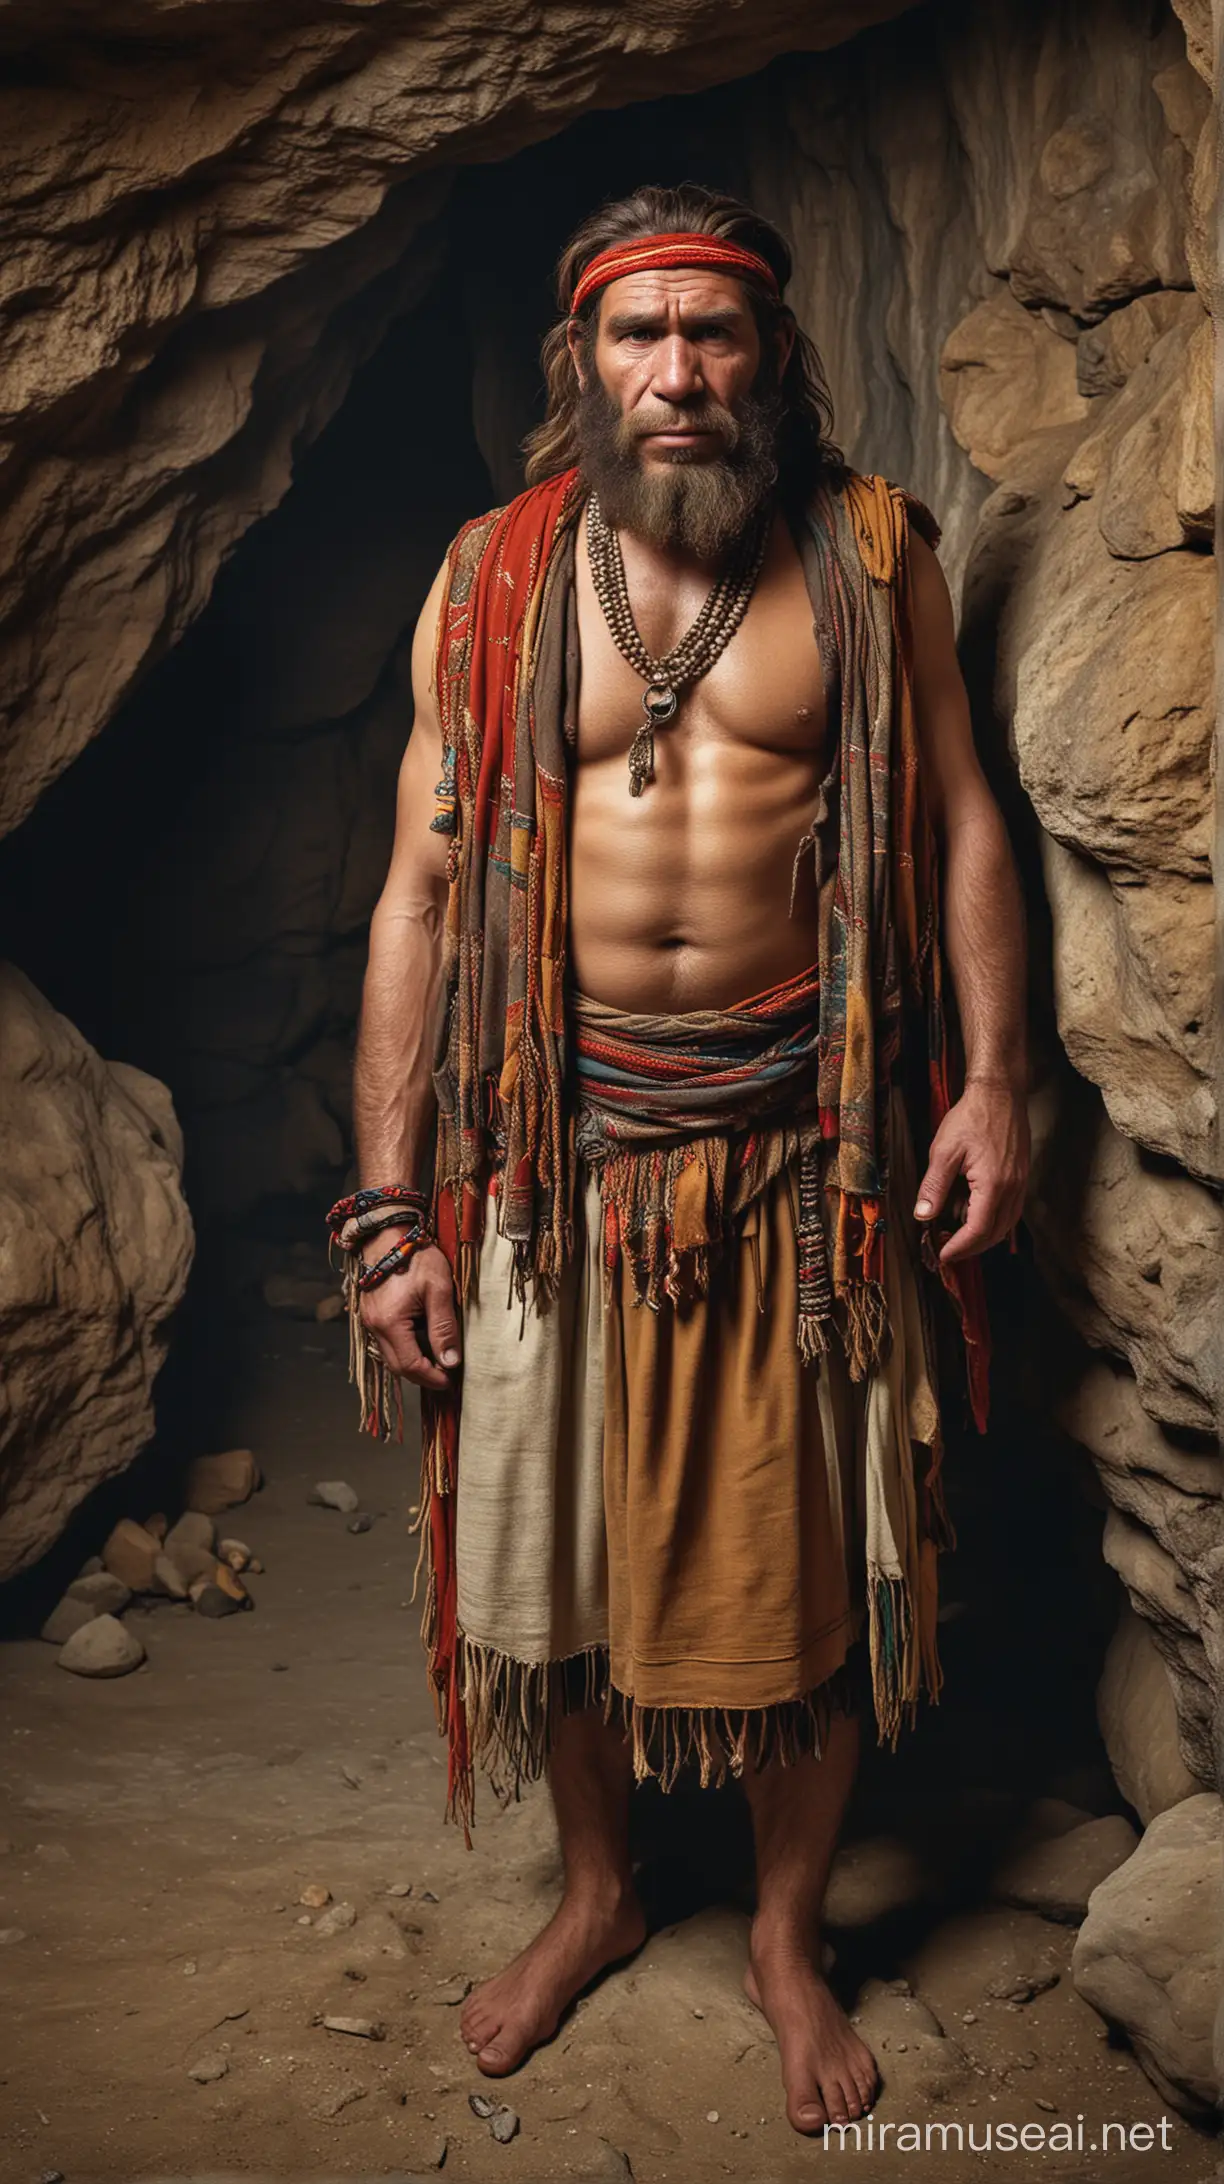 Neanderthal in Traditional Kurdish Garb within a Cave Dwelling